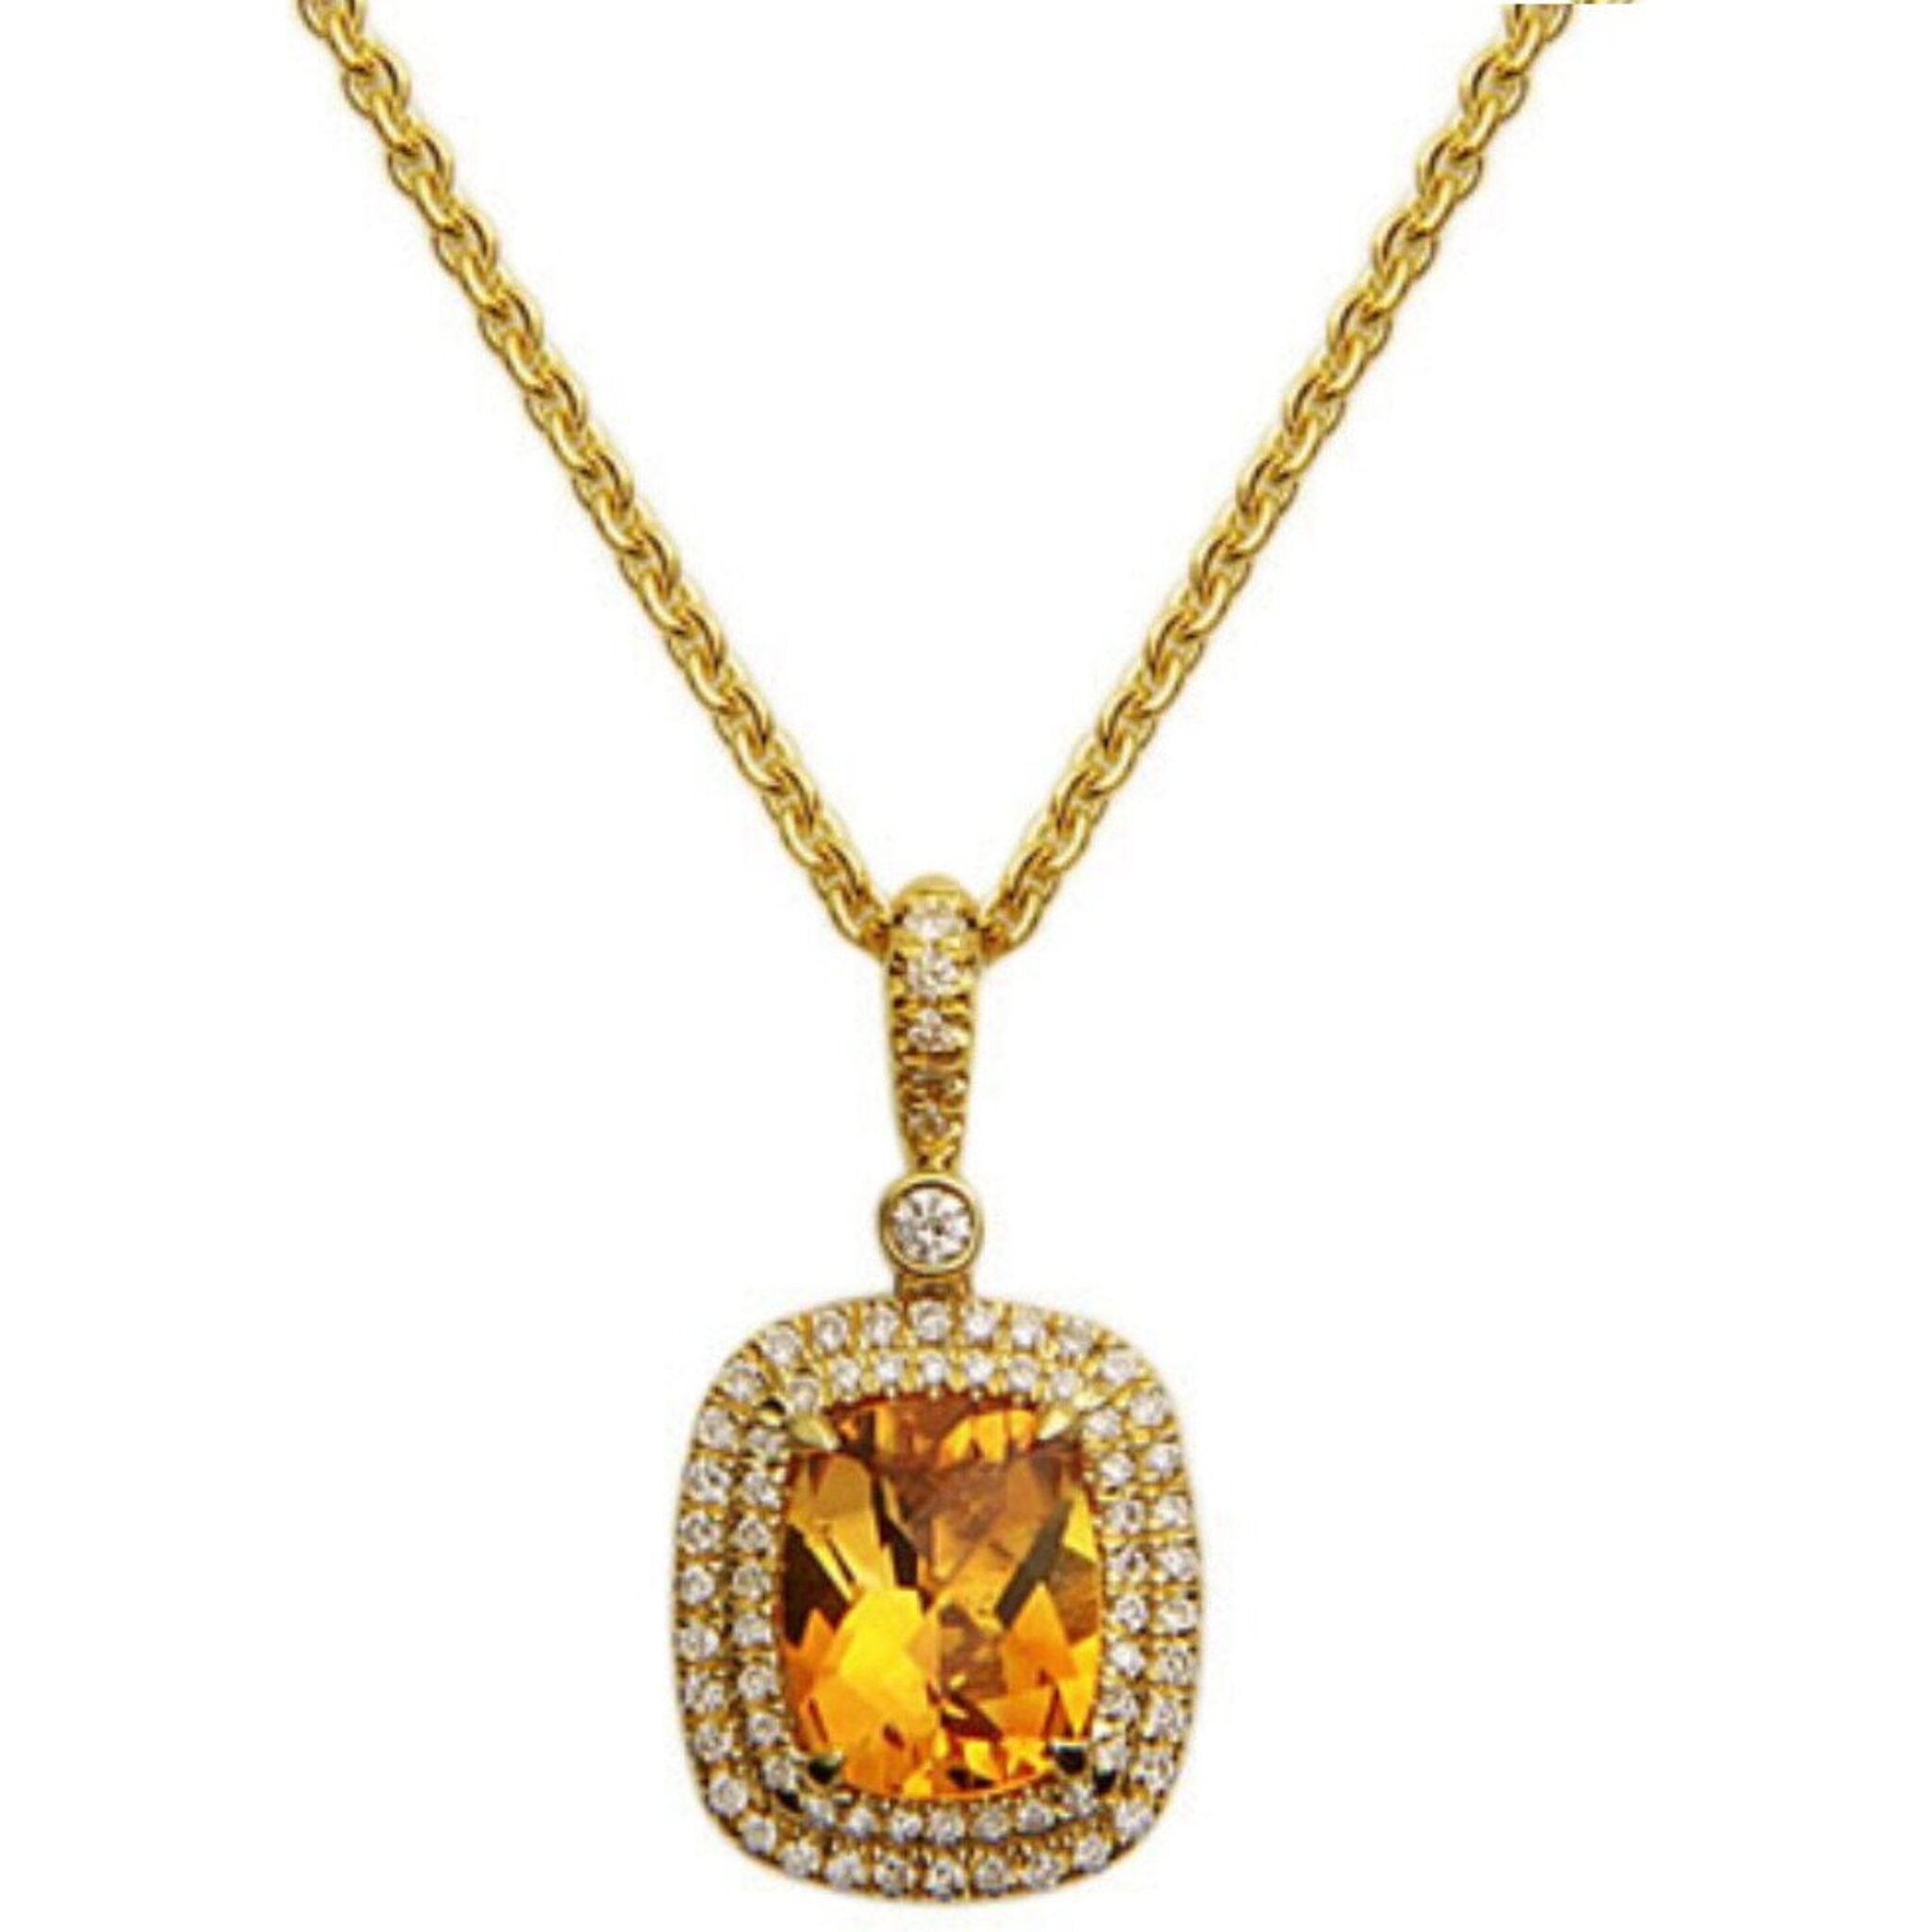 Charles Krypell - Pastel Diamond Double Halo Cushion Reversible Necklace - Citrine and Yellow Gold